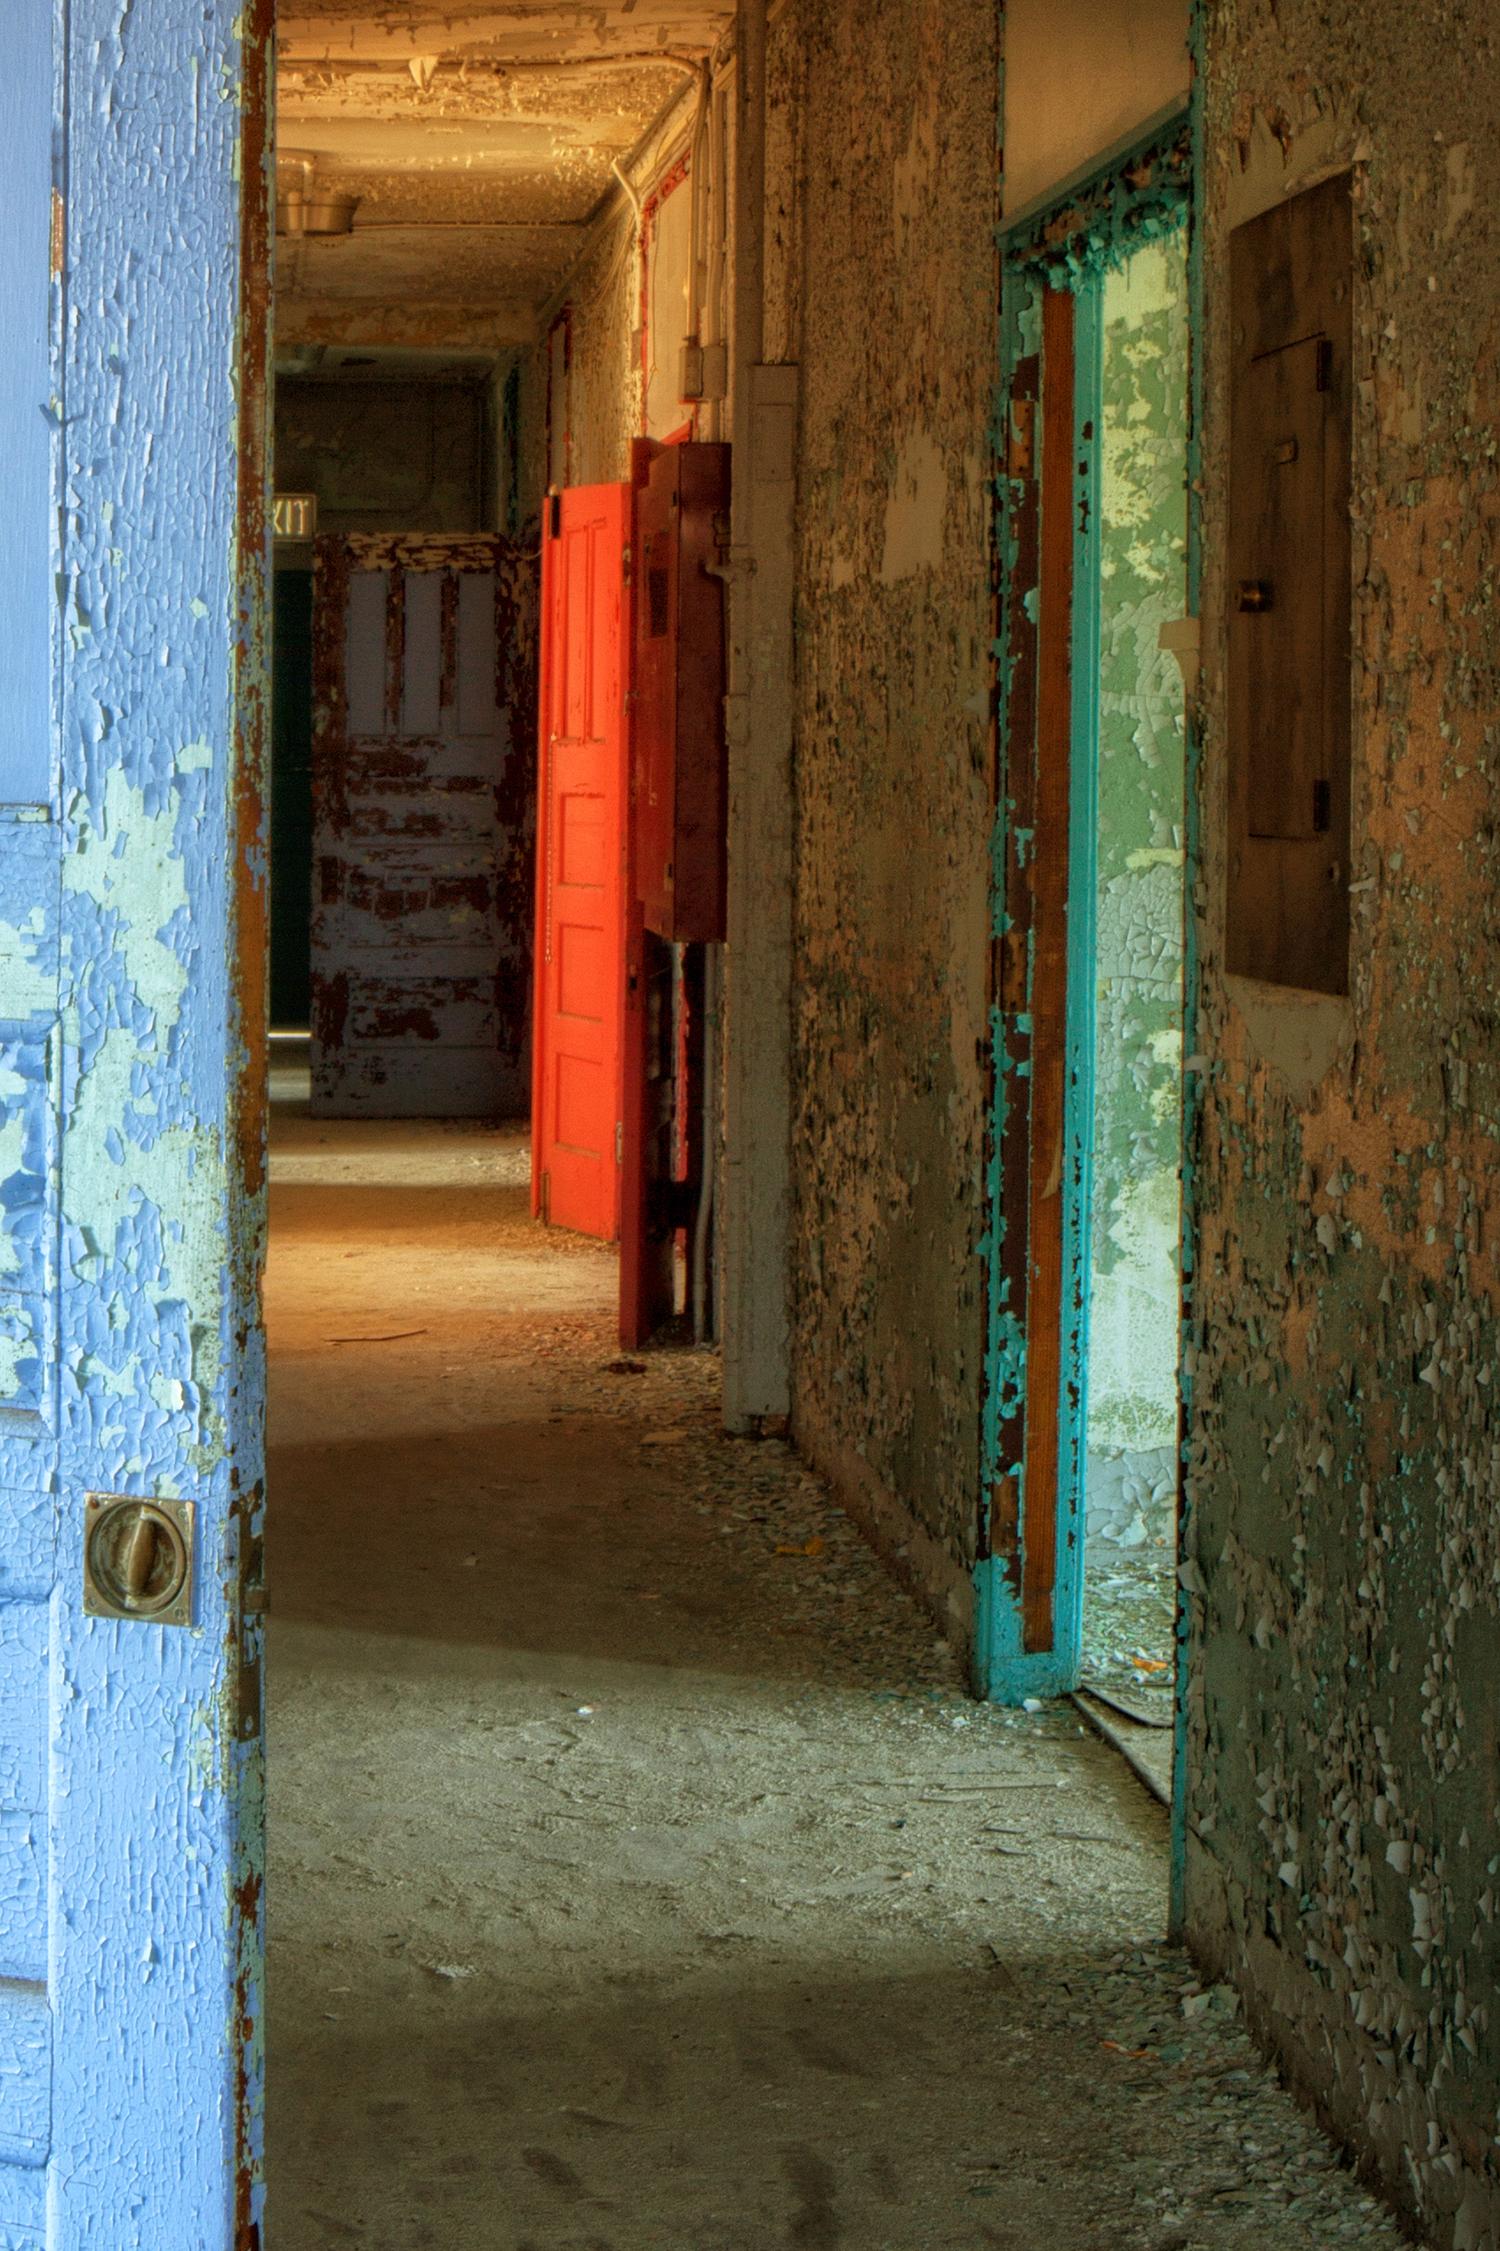 Rebecca Skinner’s “West Hallway” is a 24 x 16 inch color photograph of a hallway in an abandoned building. The purple - blue door in the foreground is riddled with peeling paint, as is the long hallway leading to other brightly colored doorways of